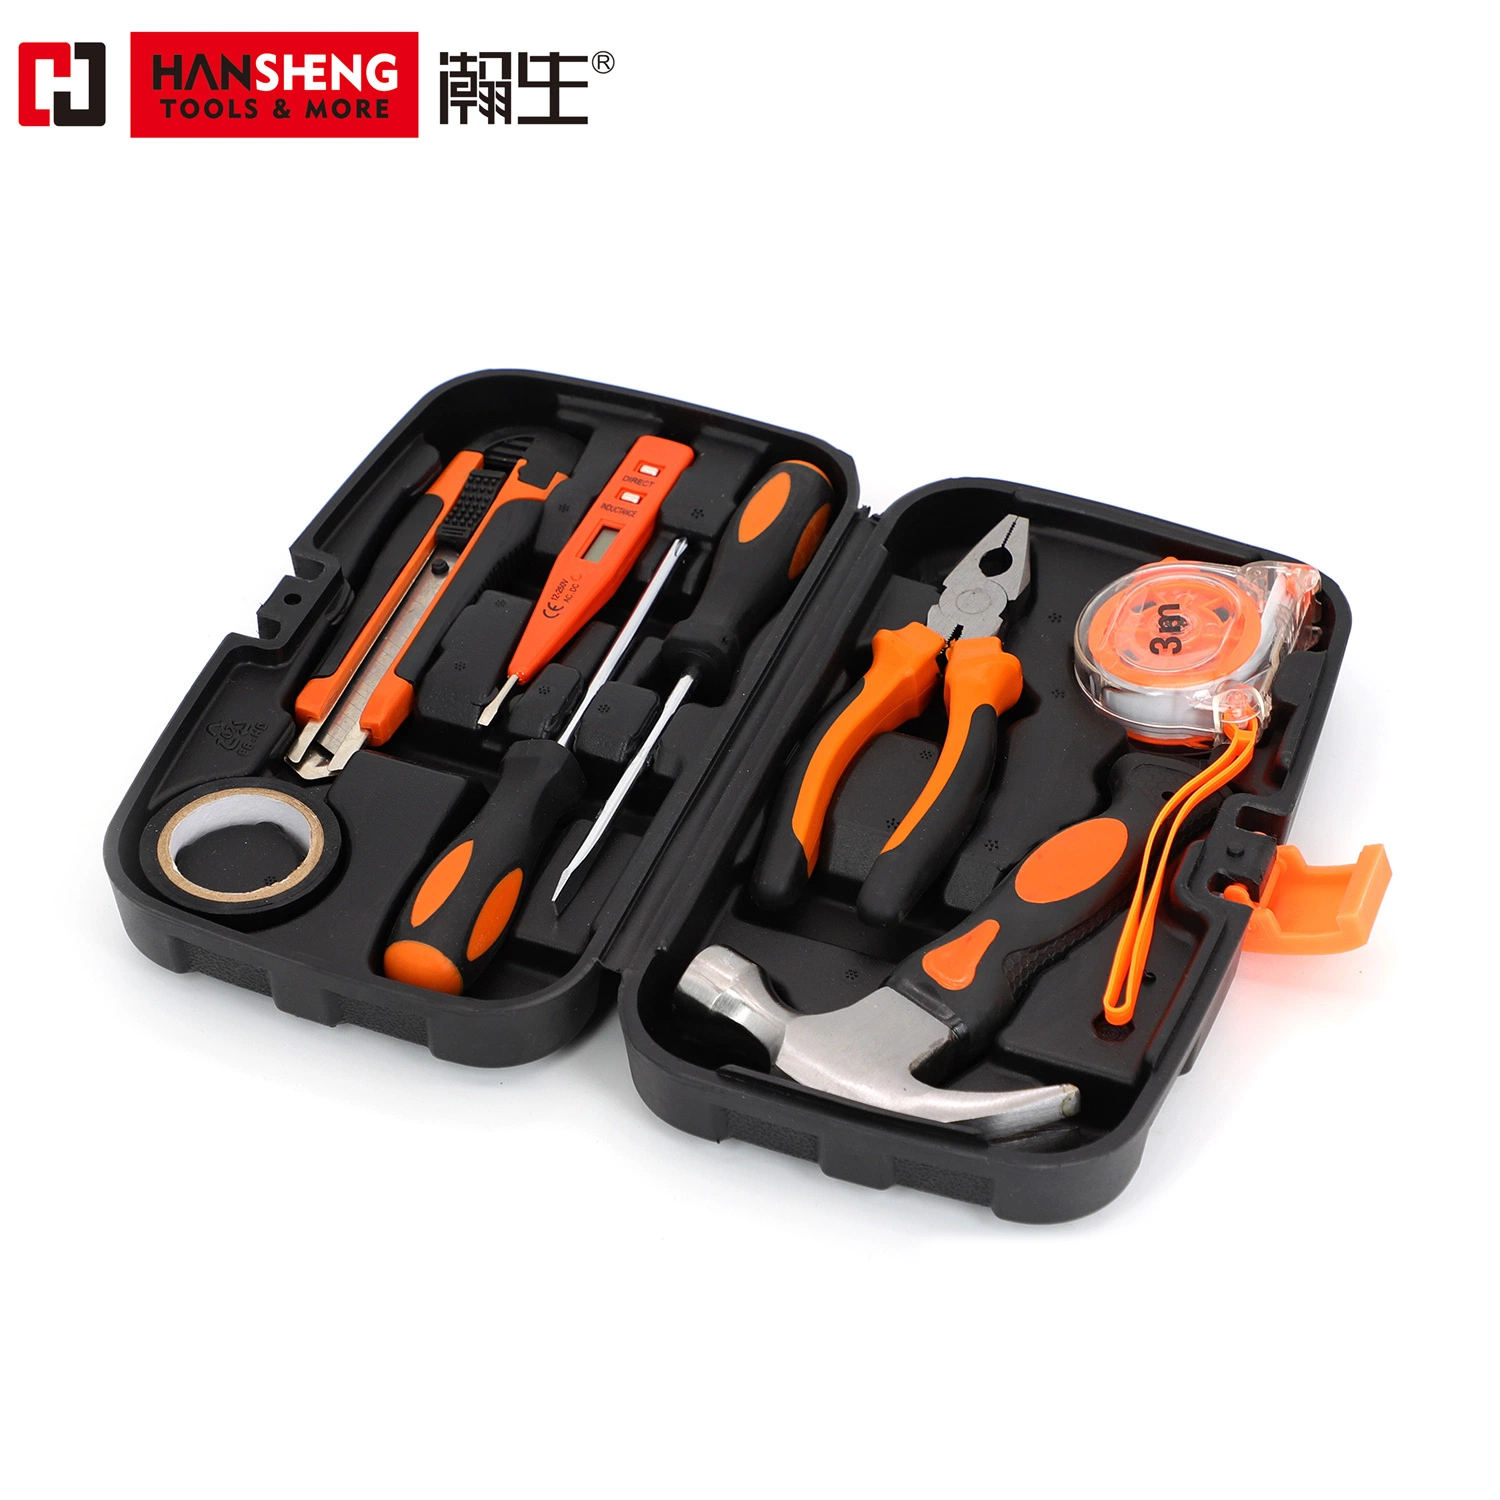 Professional Tool, Hand Tool, Hardware Set S, Plastic Toolboxgift Tools, Made of Carbon Steel, CRV, Polish, Pliers, Wire Clamp, Hammer, Wrench, Snips